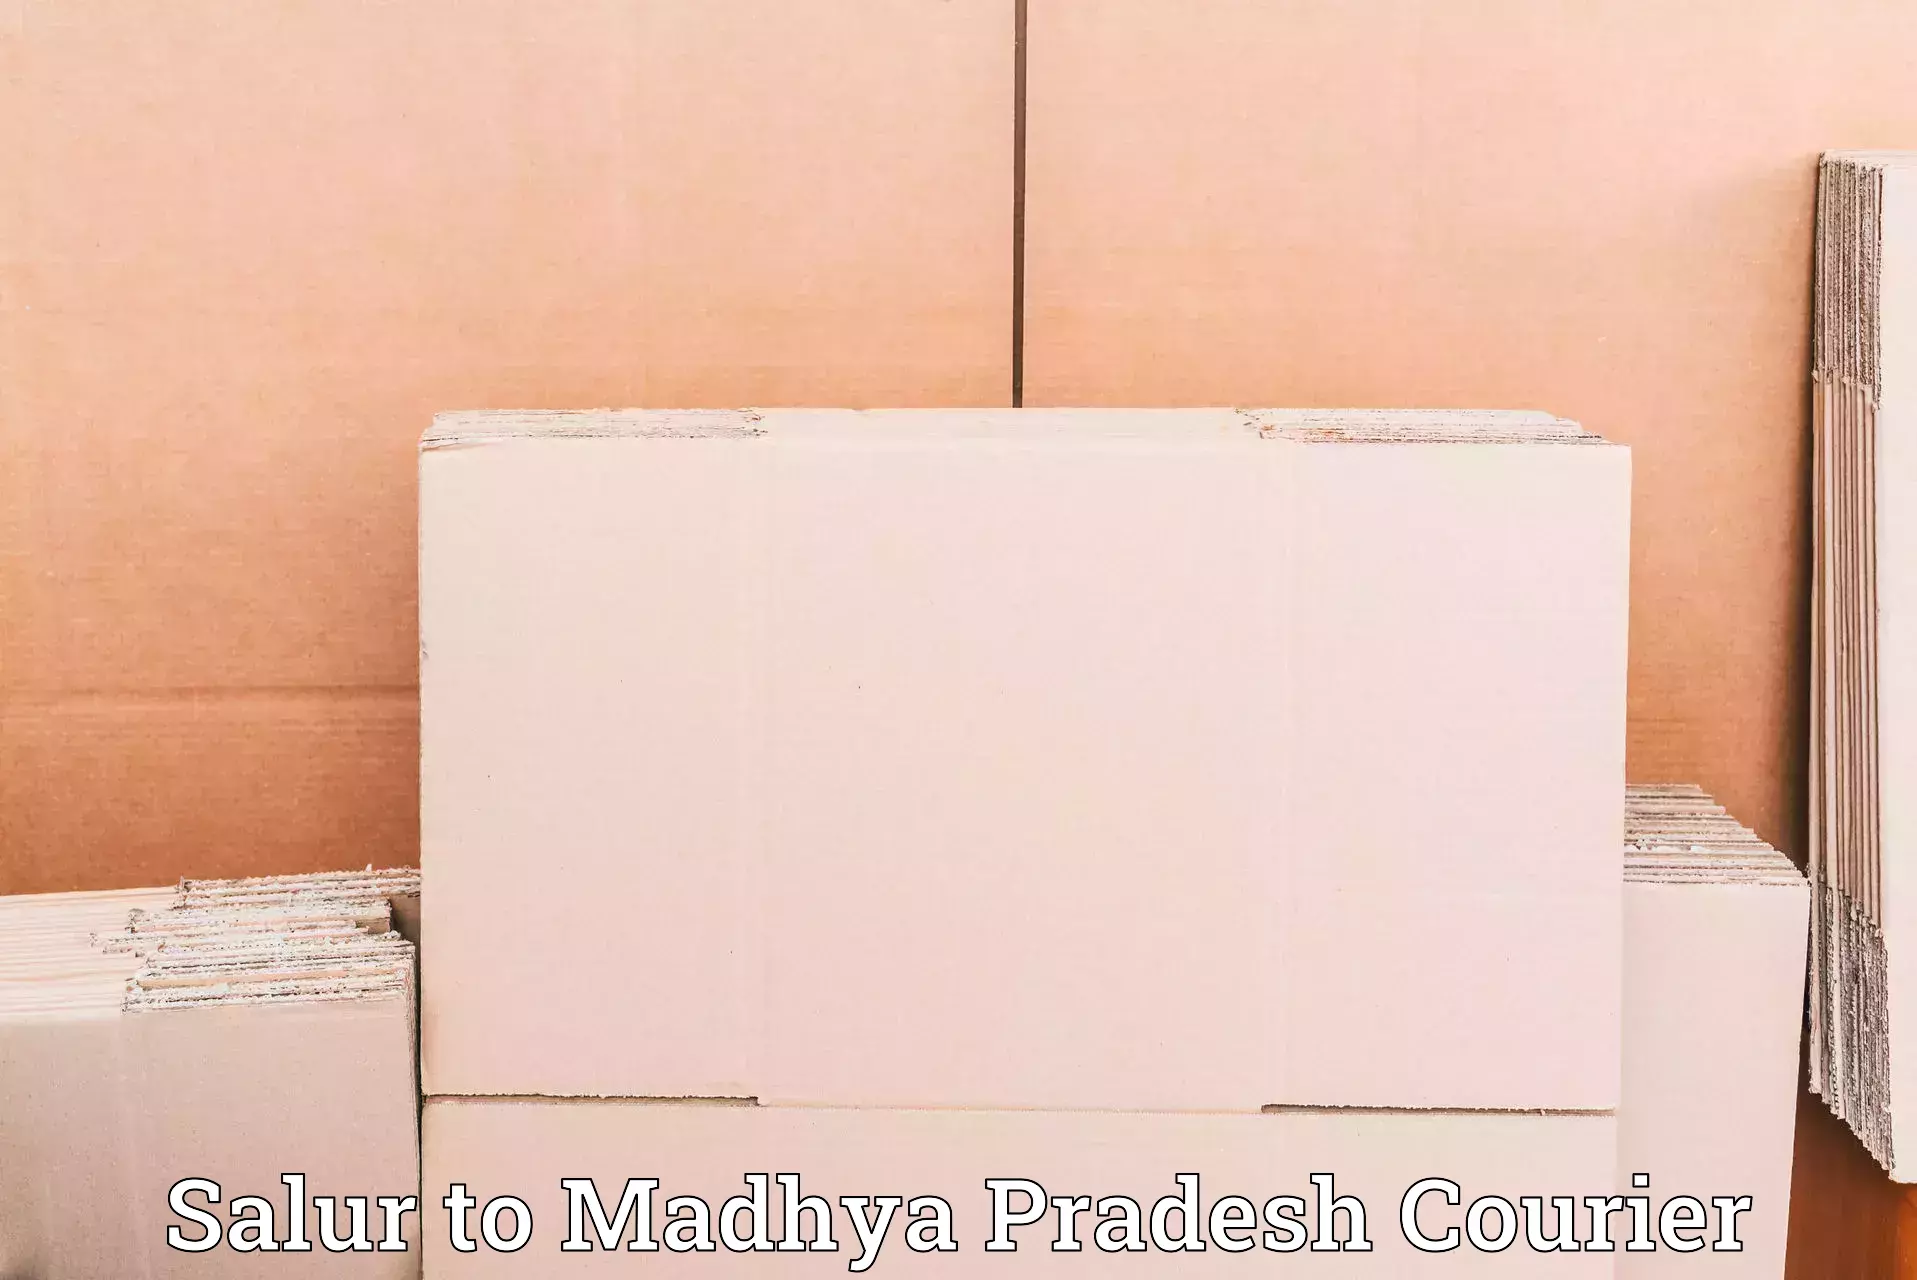 State-of-the-art courier technology Salur to Garh Rewa